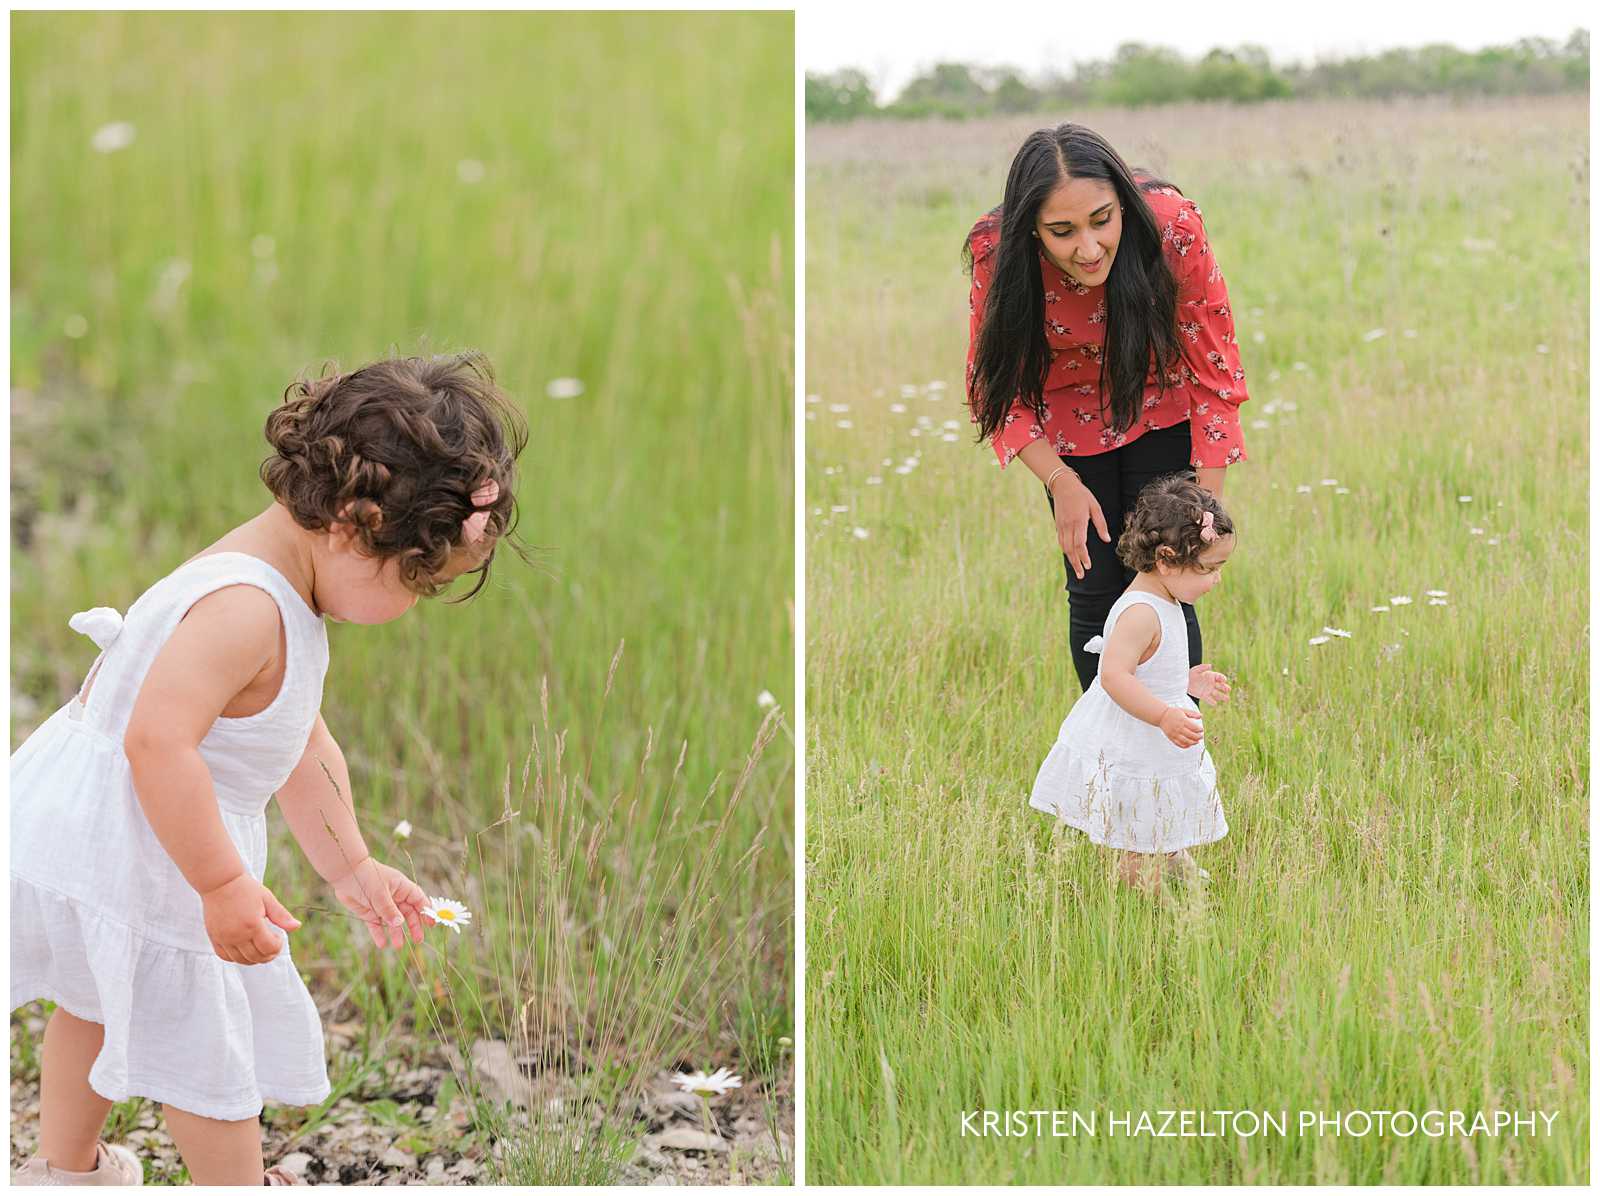 Toddler girl picking daisies in a meadow with her mother by Forest Park, IL photographer Kristen Hazelton